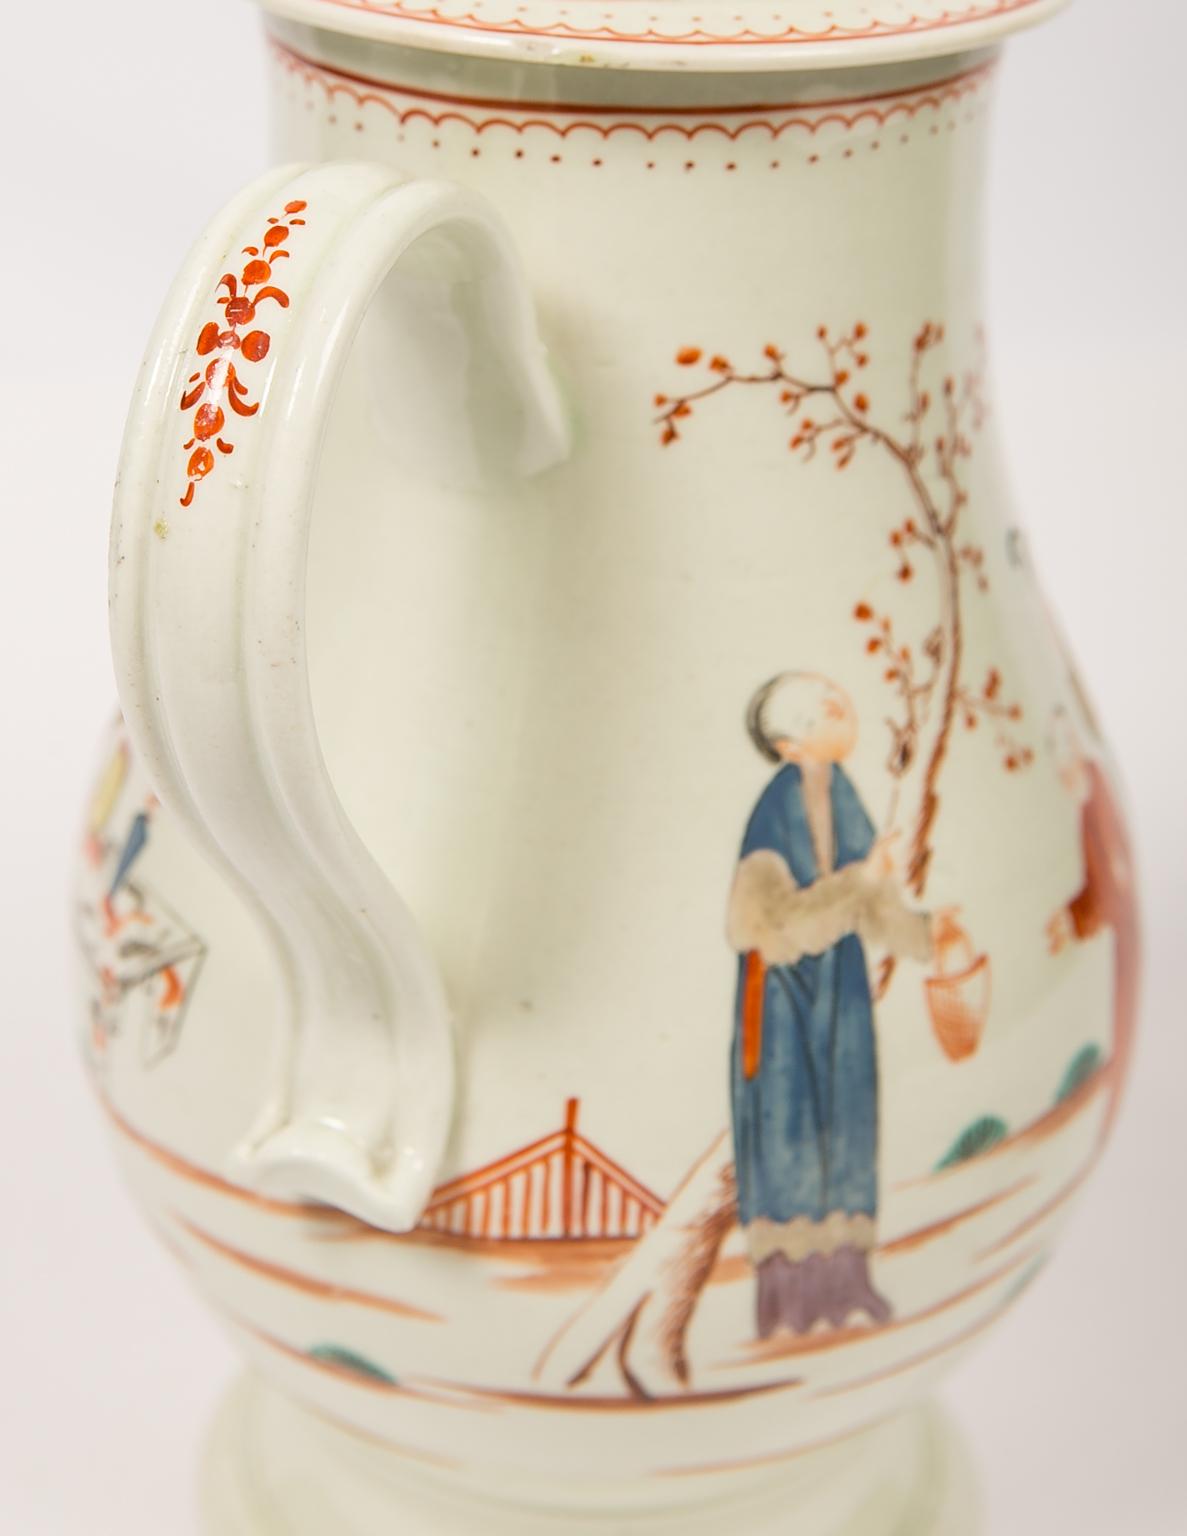 We are pleased to offer this rare Liverpool soft-paste porcelain coffee pot made in England in the late 18th century, circa 1785. 
The pot is painted with a lovely chinoiserie scene on both sides of the body. In the scene, a lady stands in front of